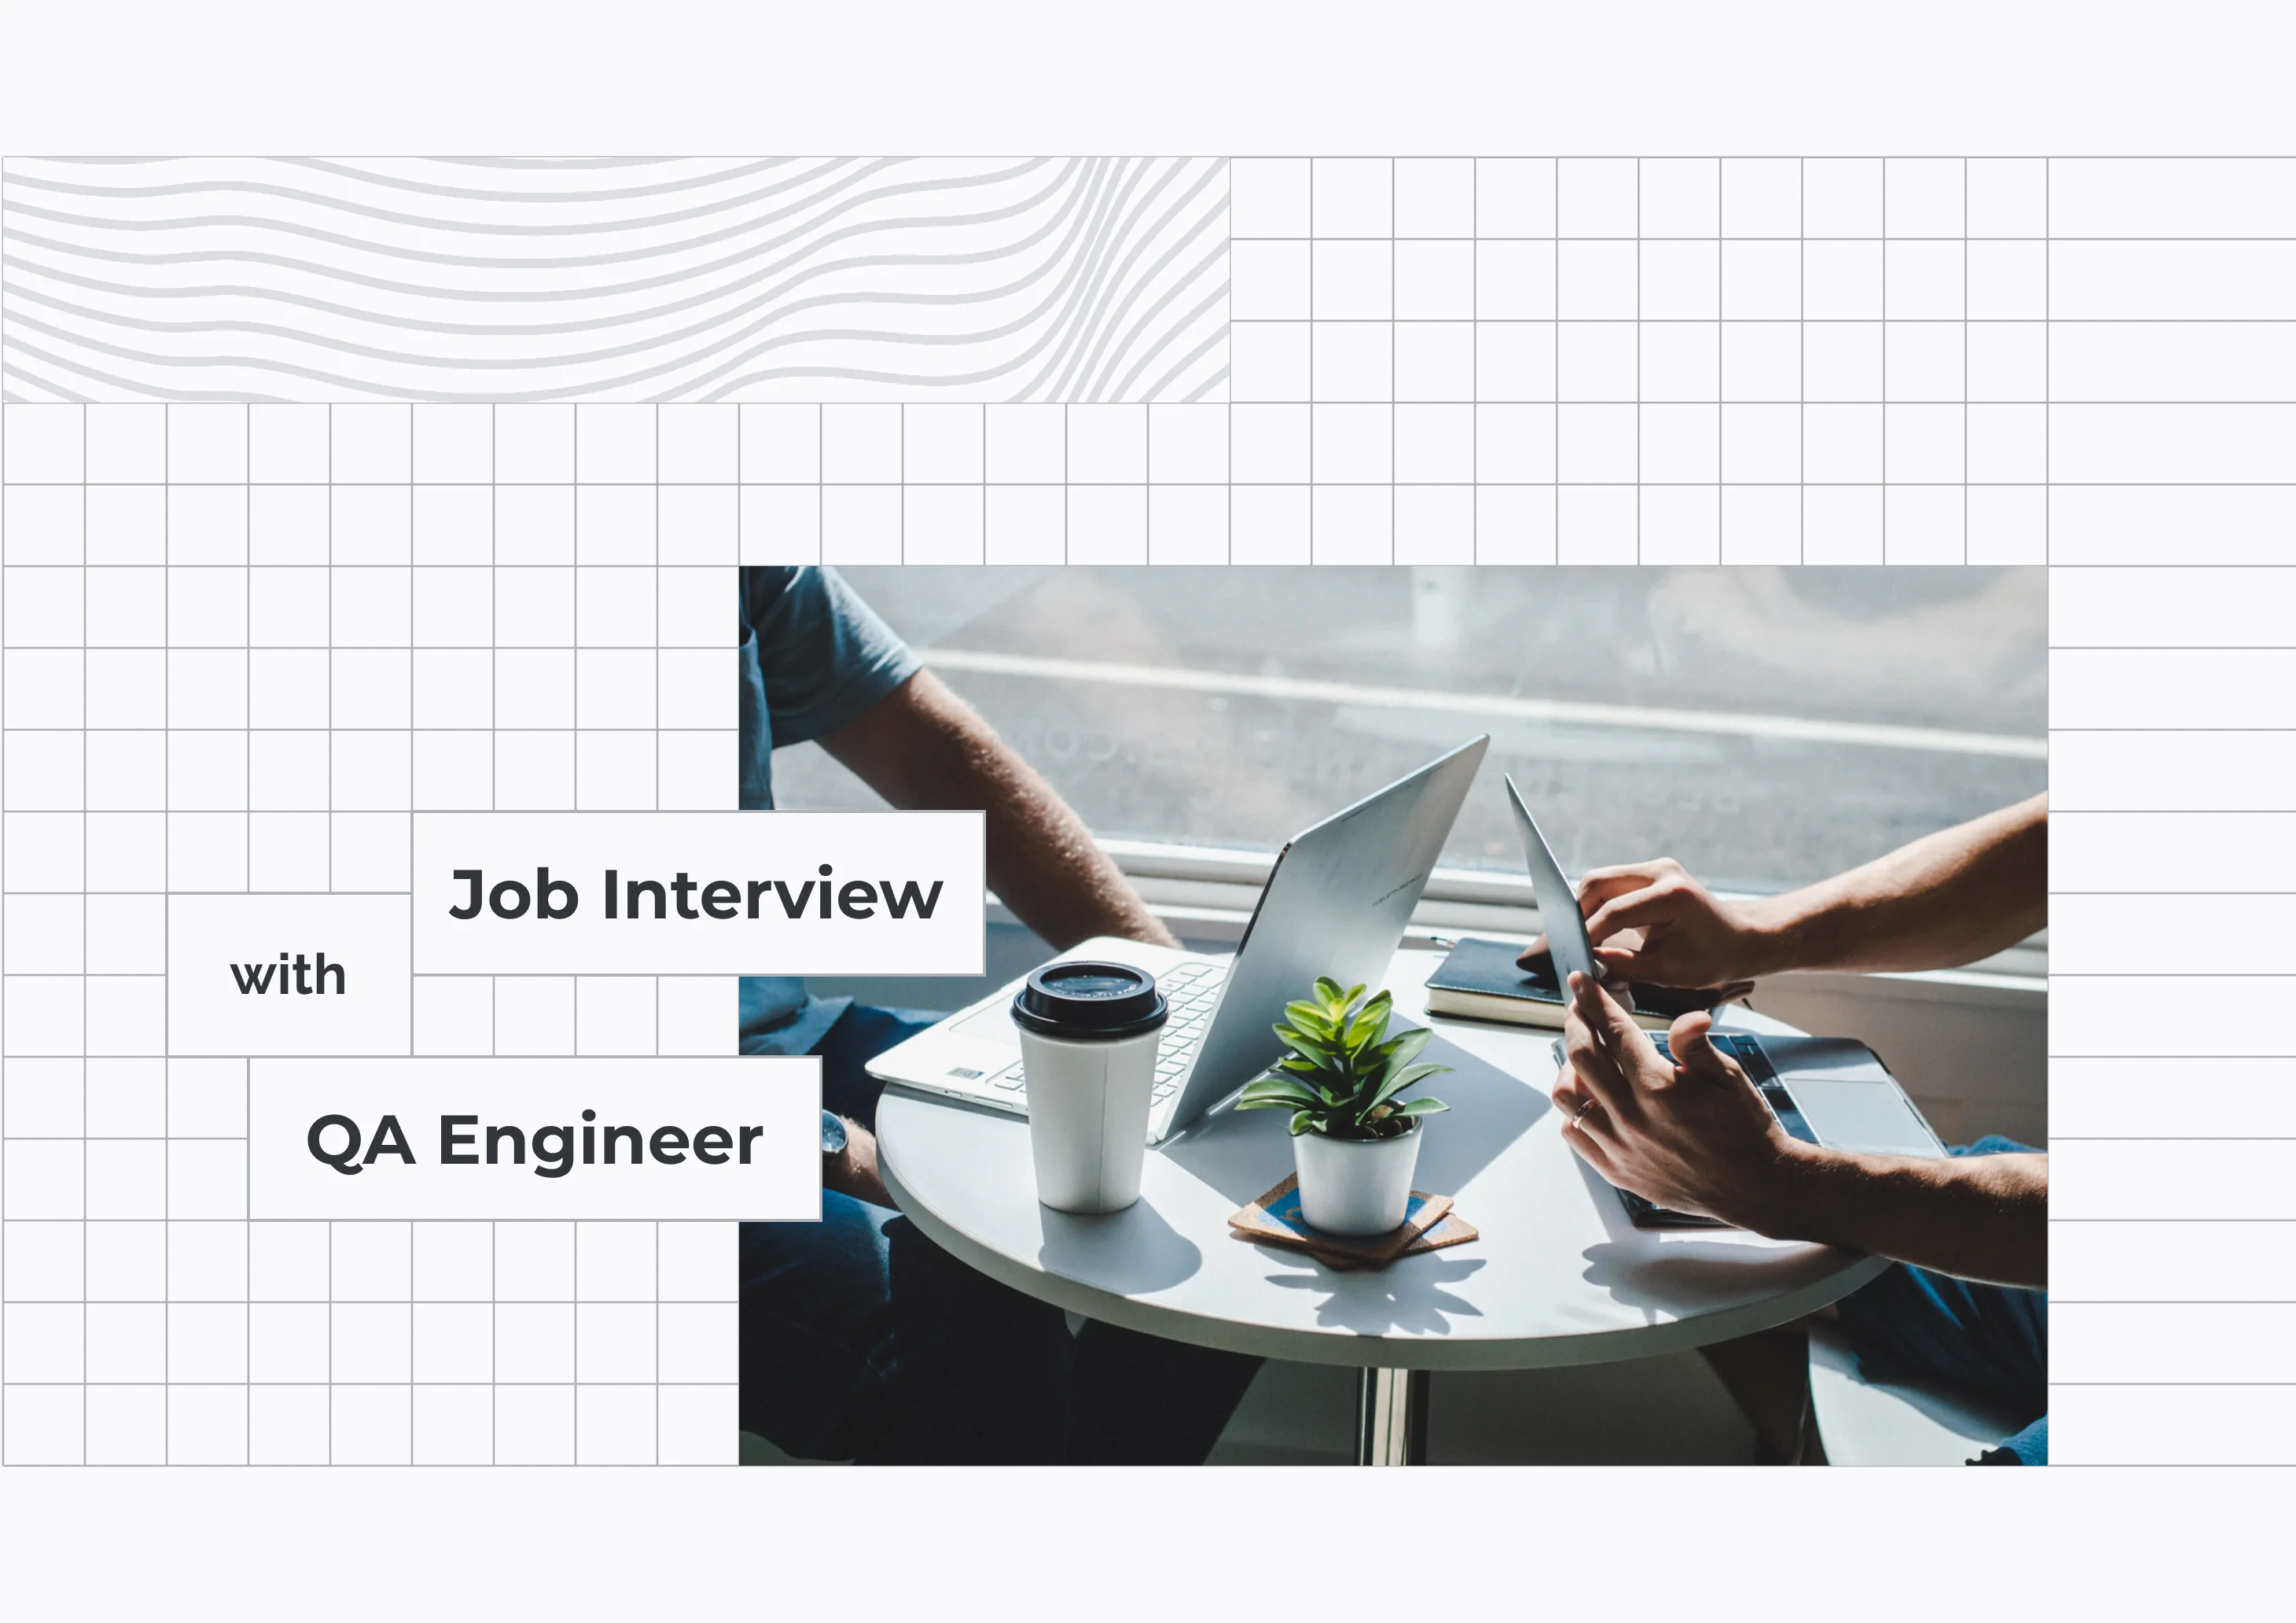 How To Conduct An Effective Job Interview With QA Engineer